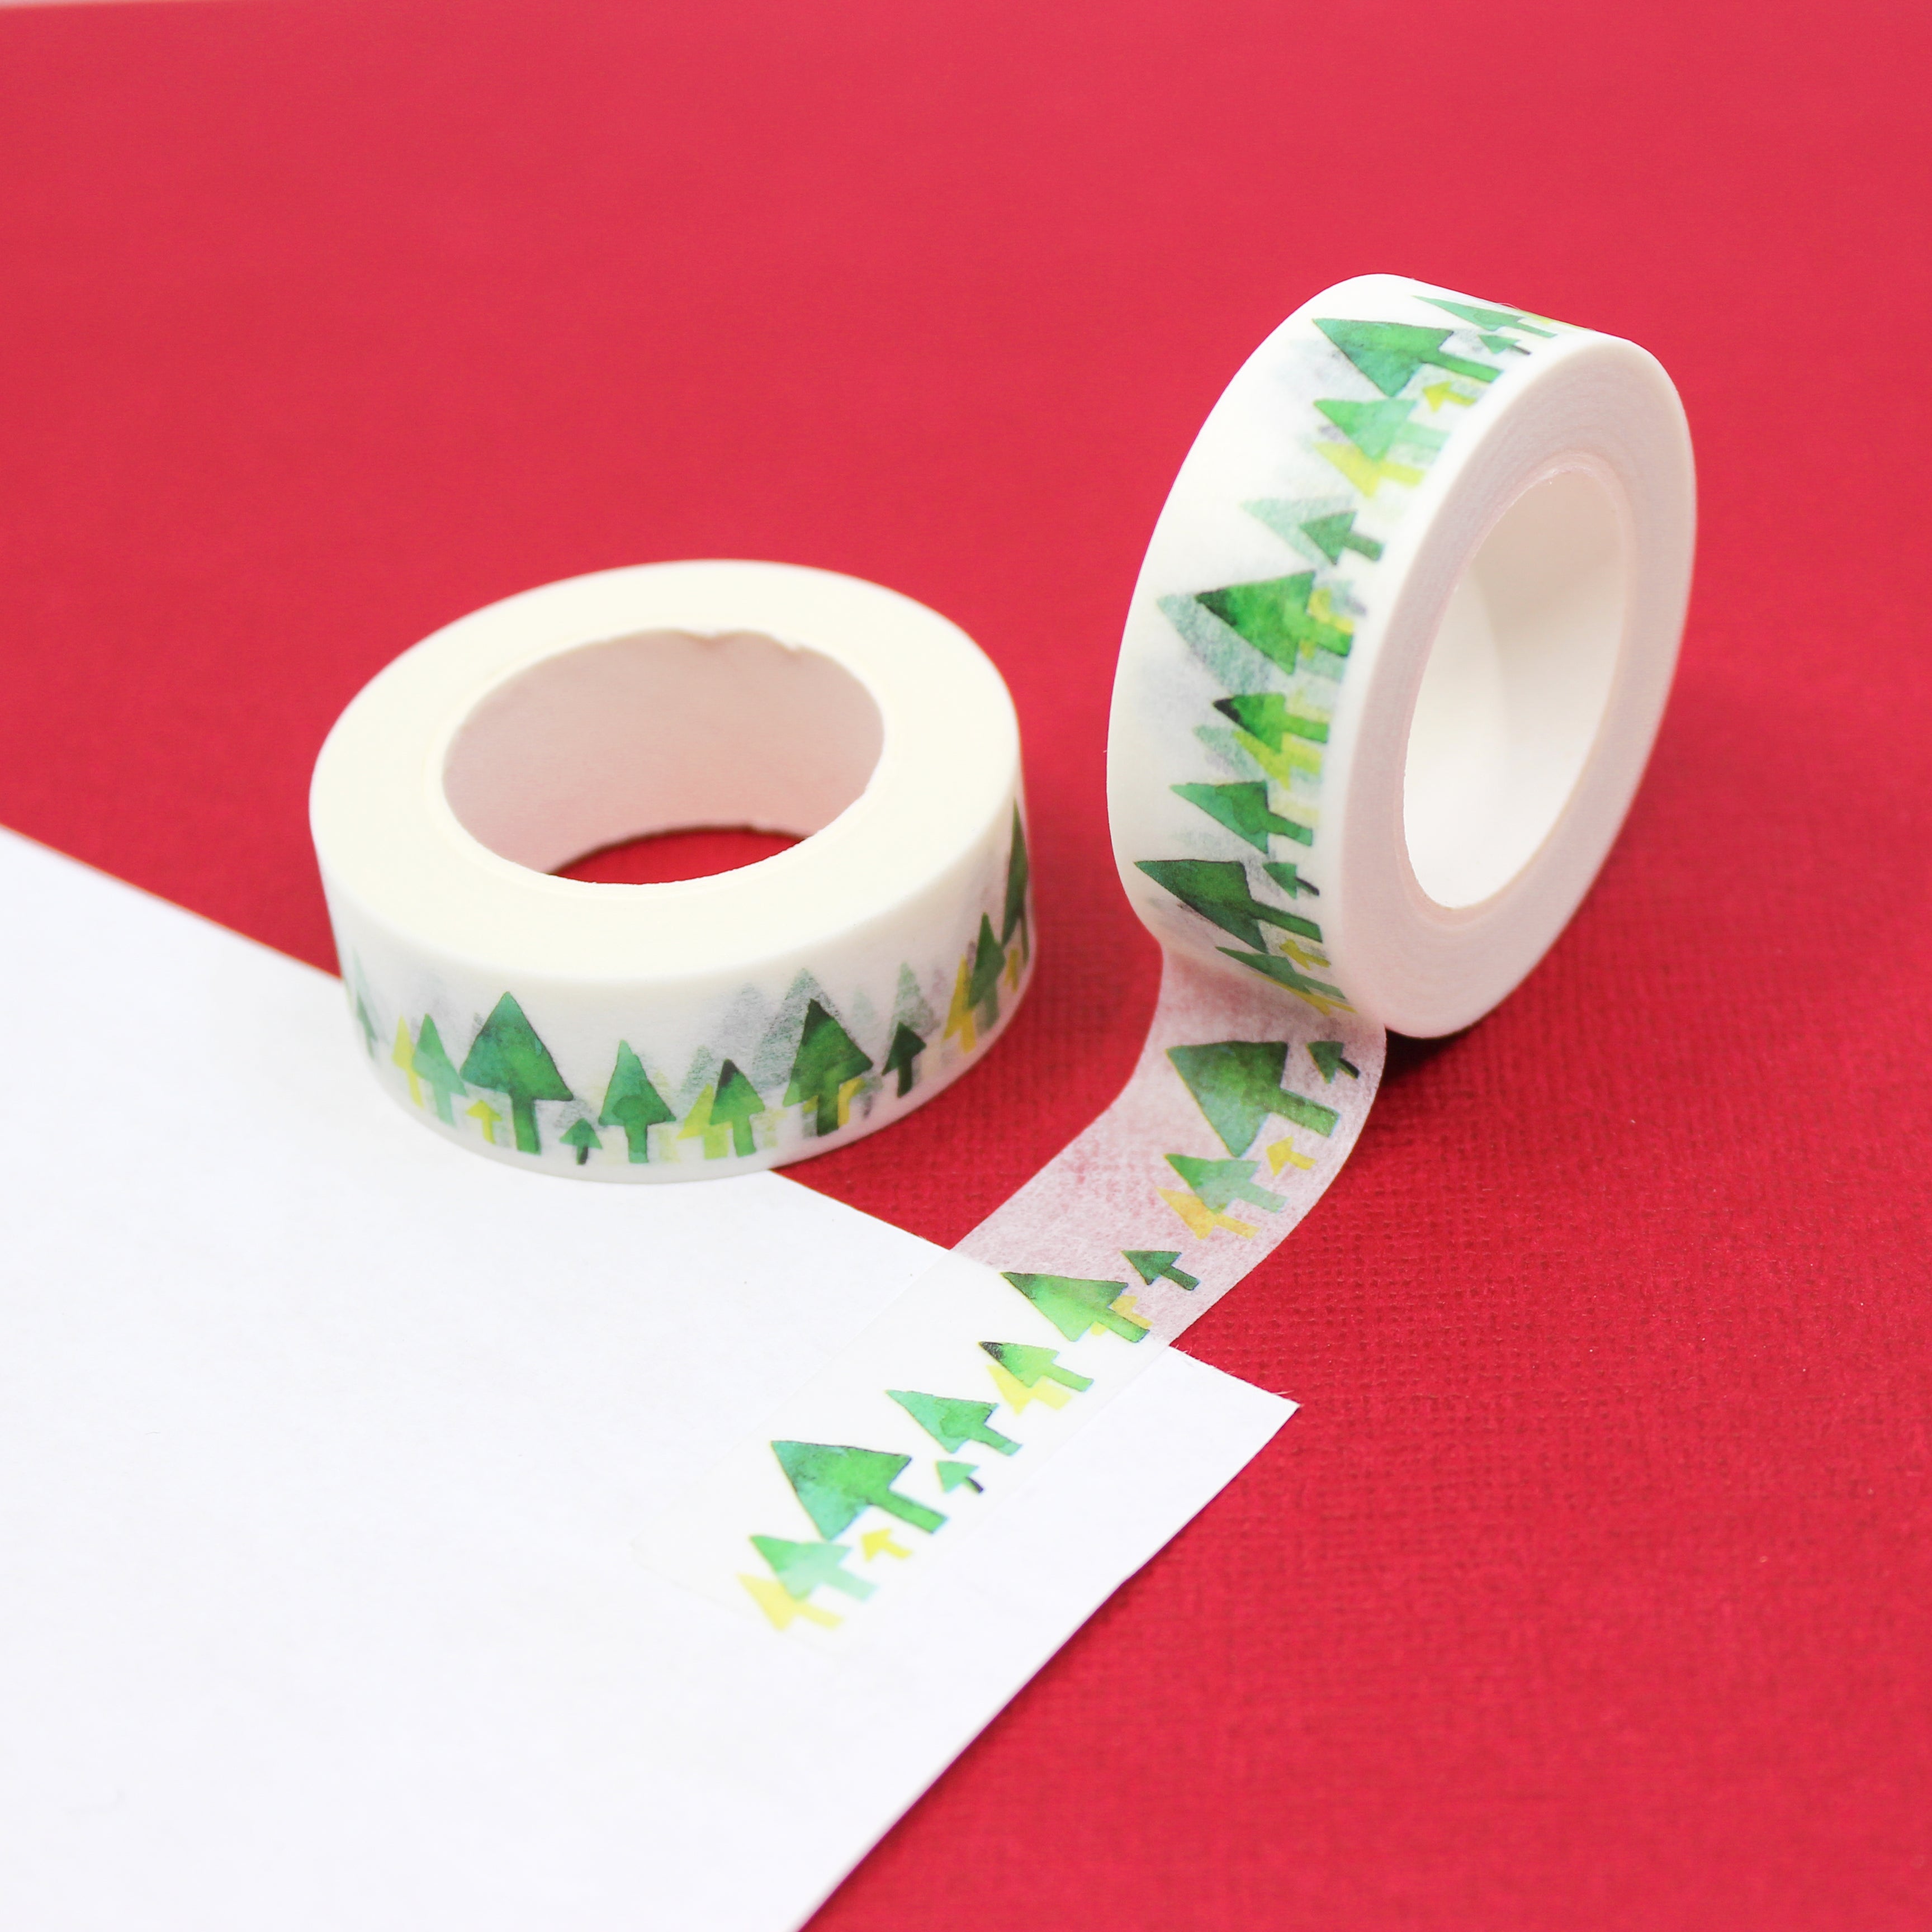 This is a fun holiday green Christmas tree view themed washi tape from BBB Supplies Craft Shop